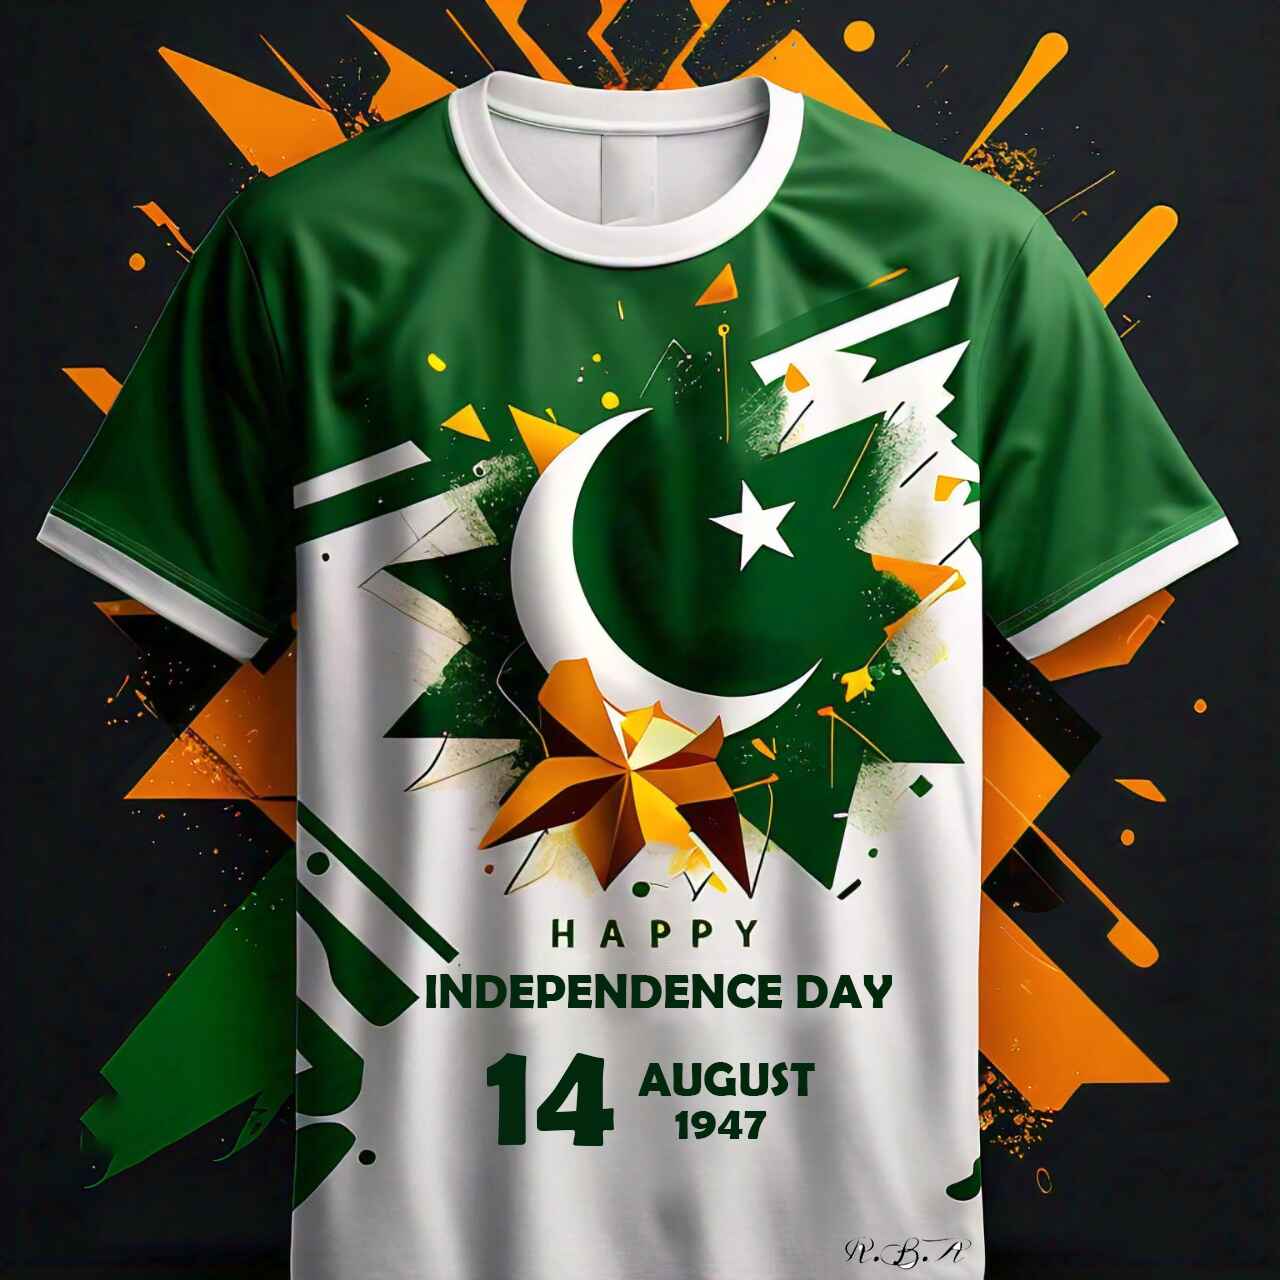 INDEPENDENCE DAY OF PAKSIATAN T-SHIRT DESIGN cover image.